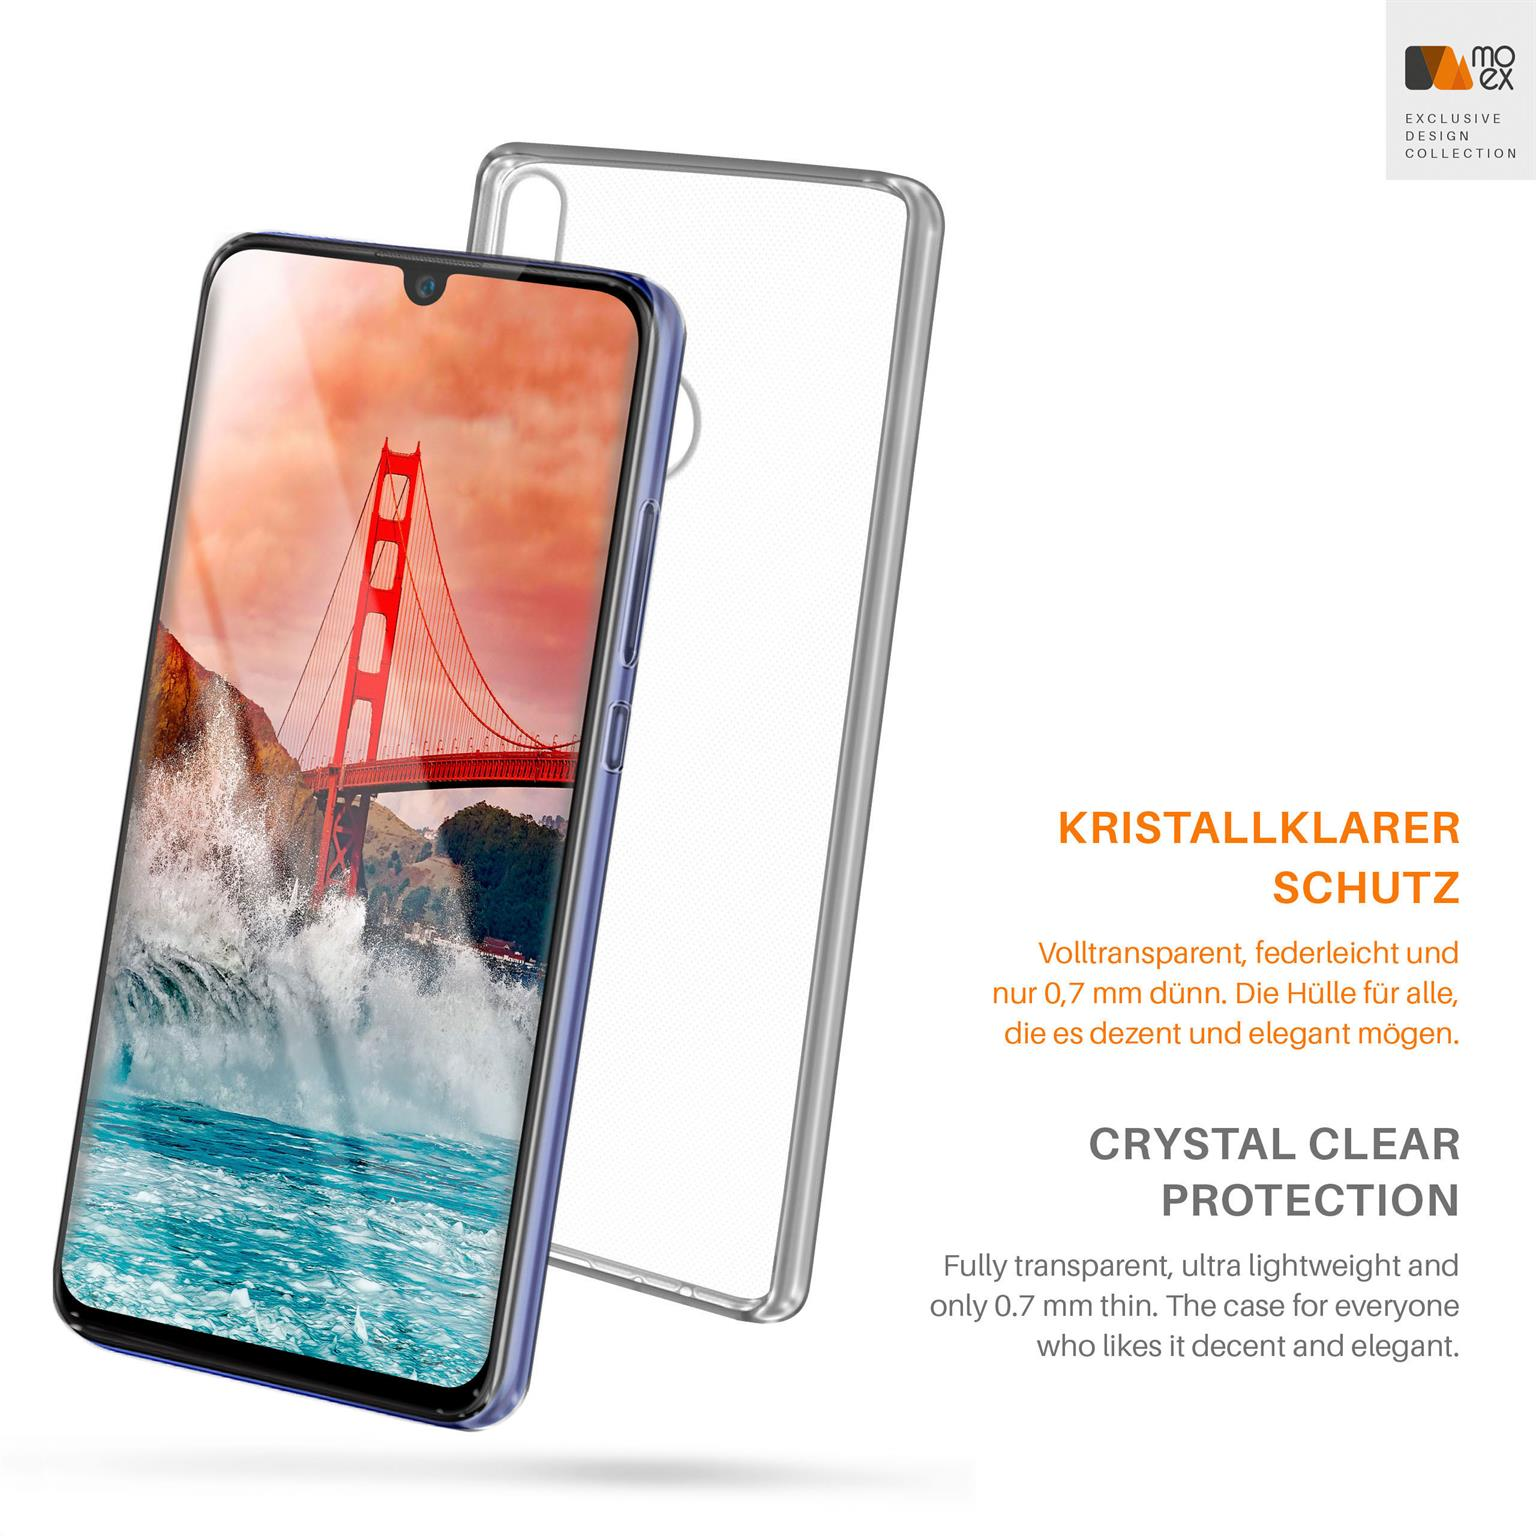 MOEX Aero Case, P Huawei, Backcover, 2019, Crystal-Clear Plus smart